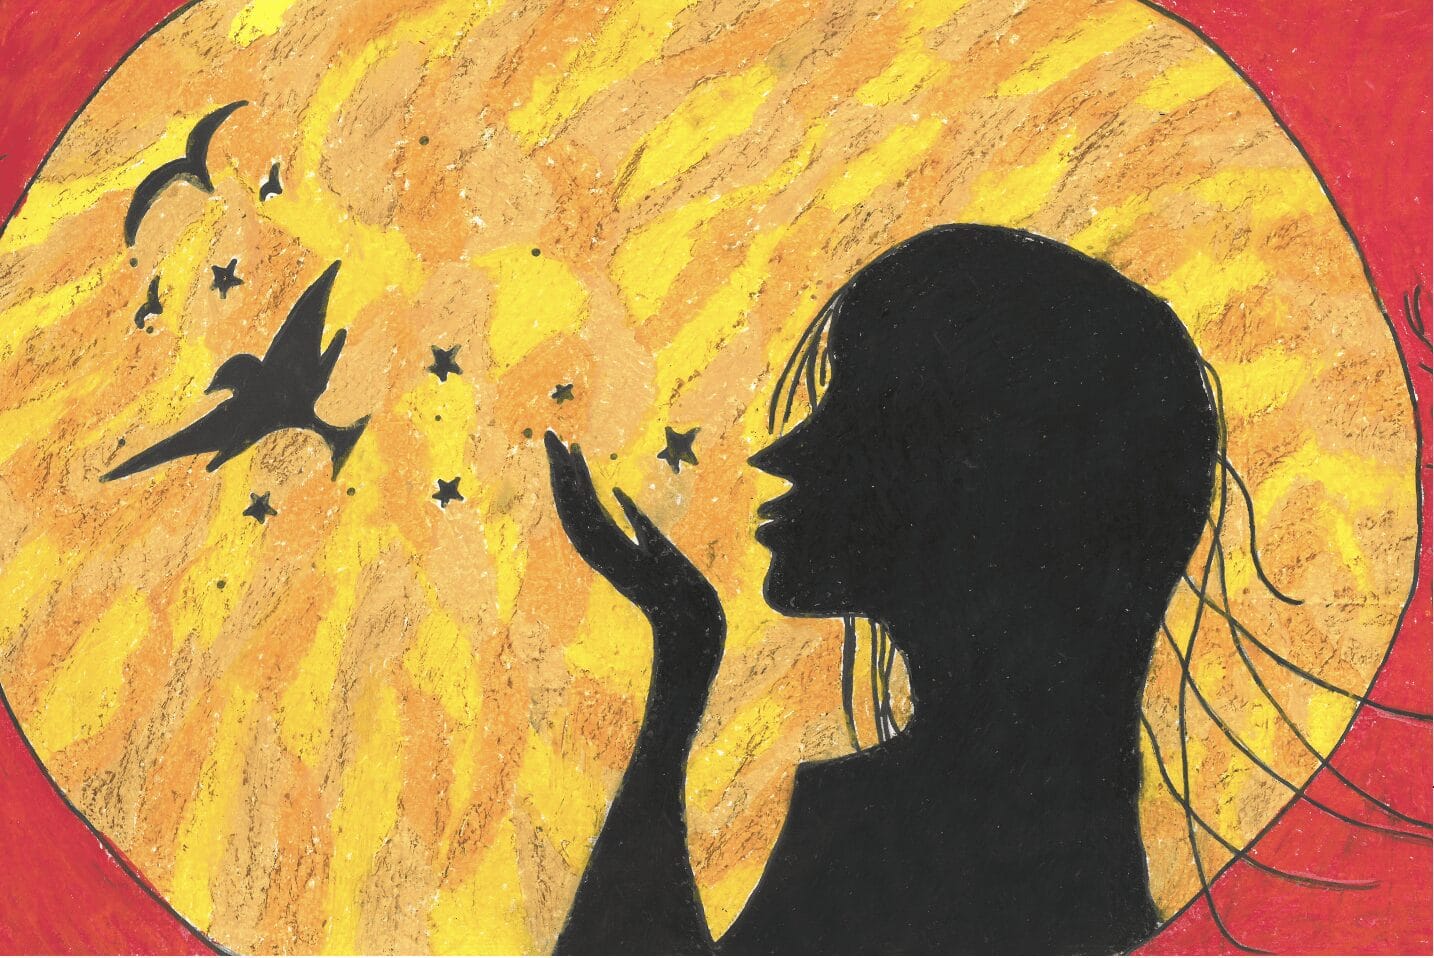 Painting. Black silhouette blowing stars in front of sun. Red background.